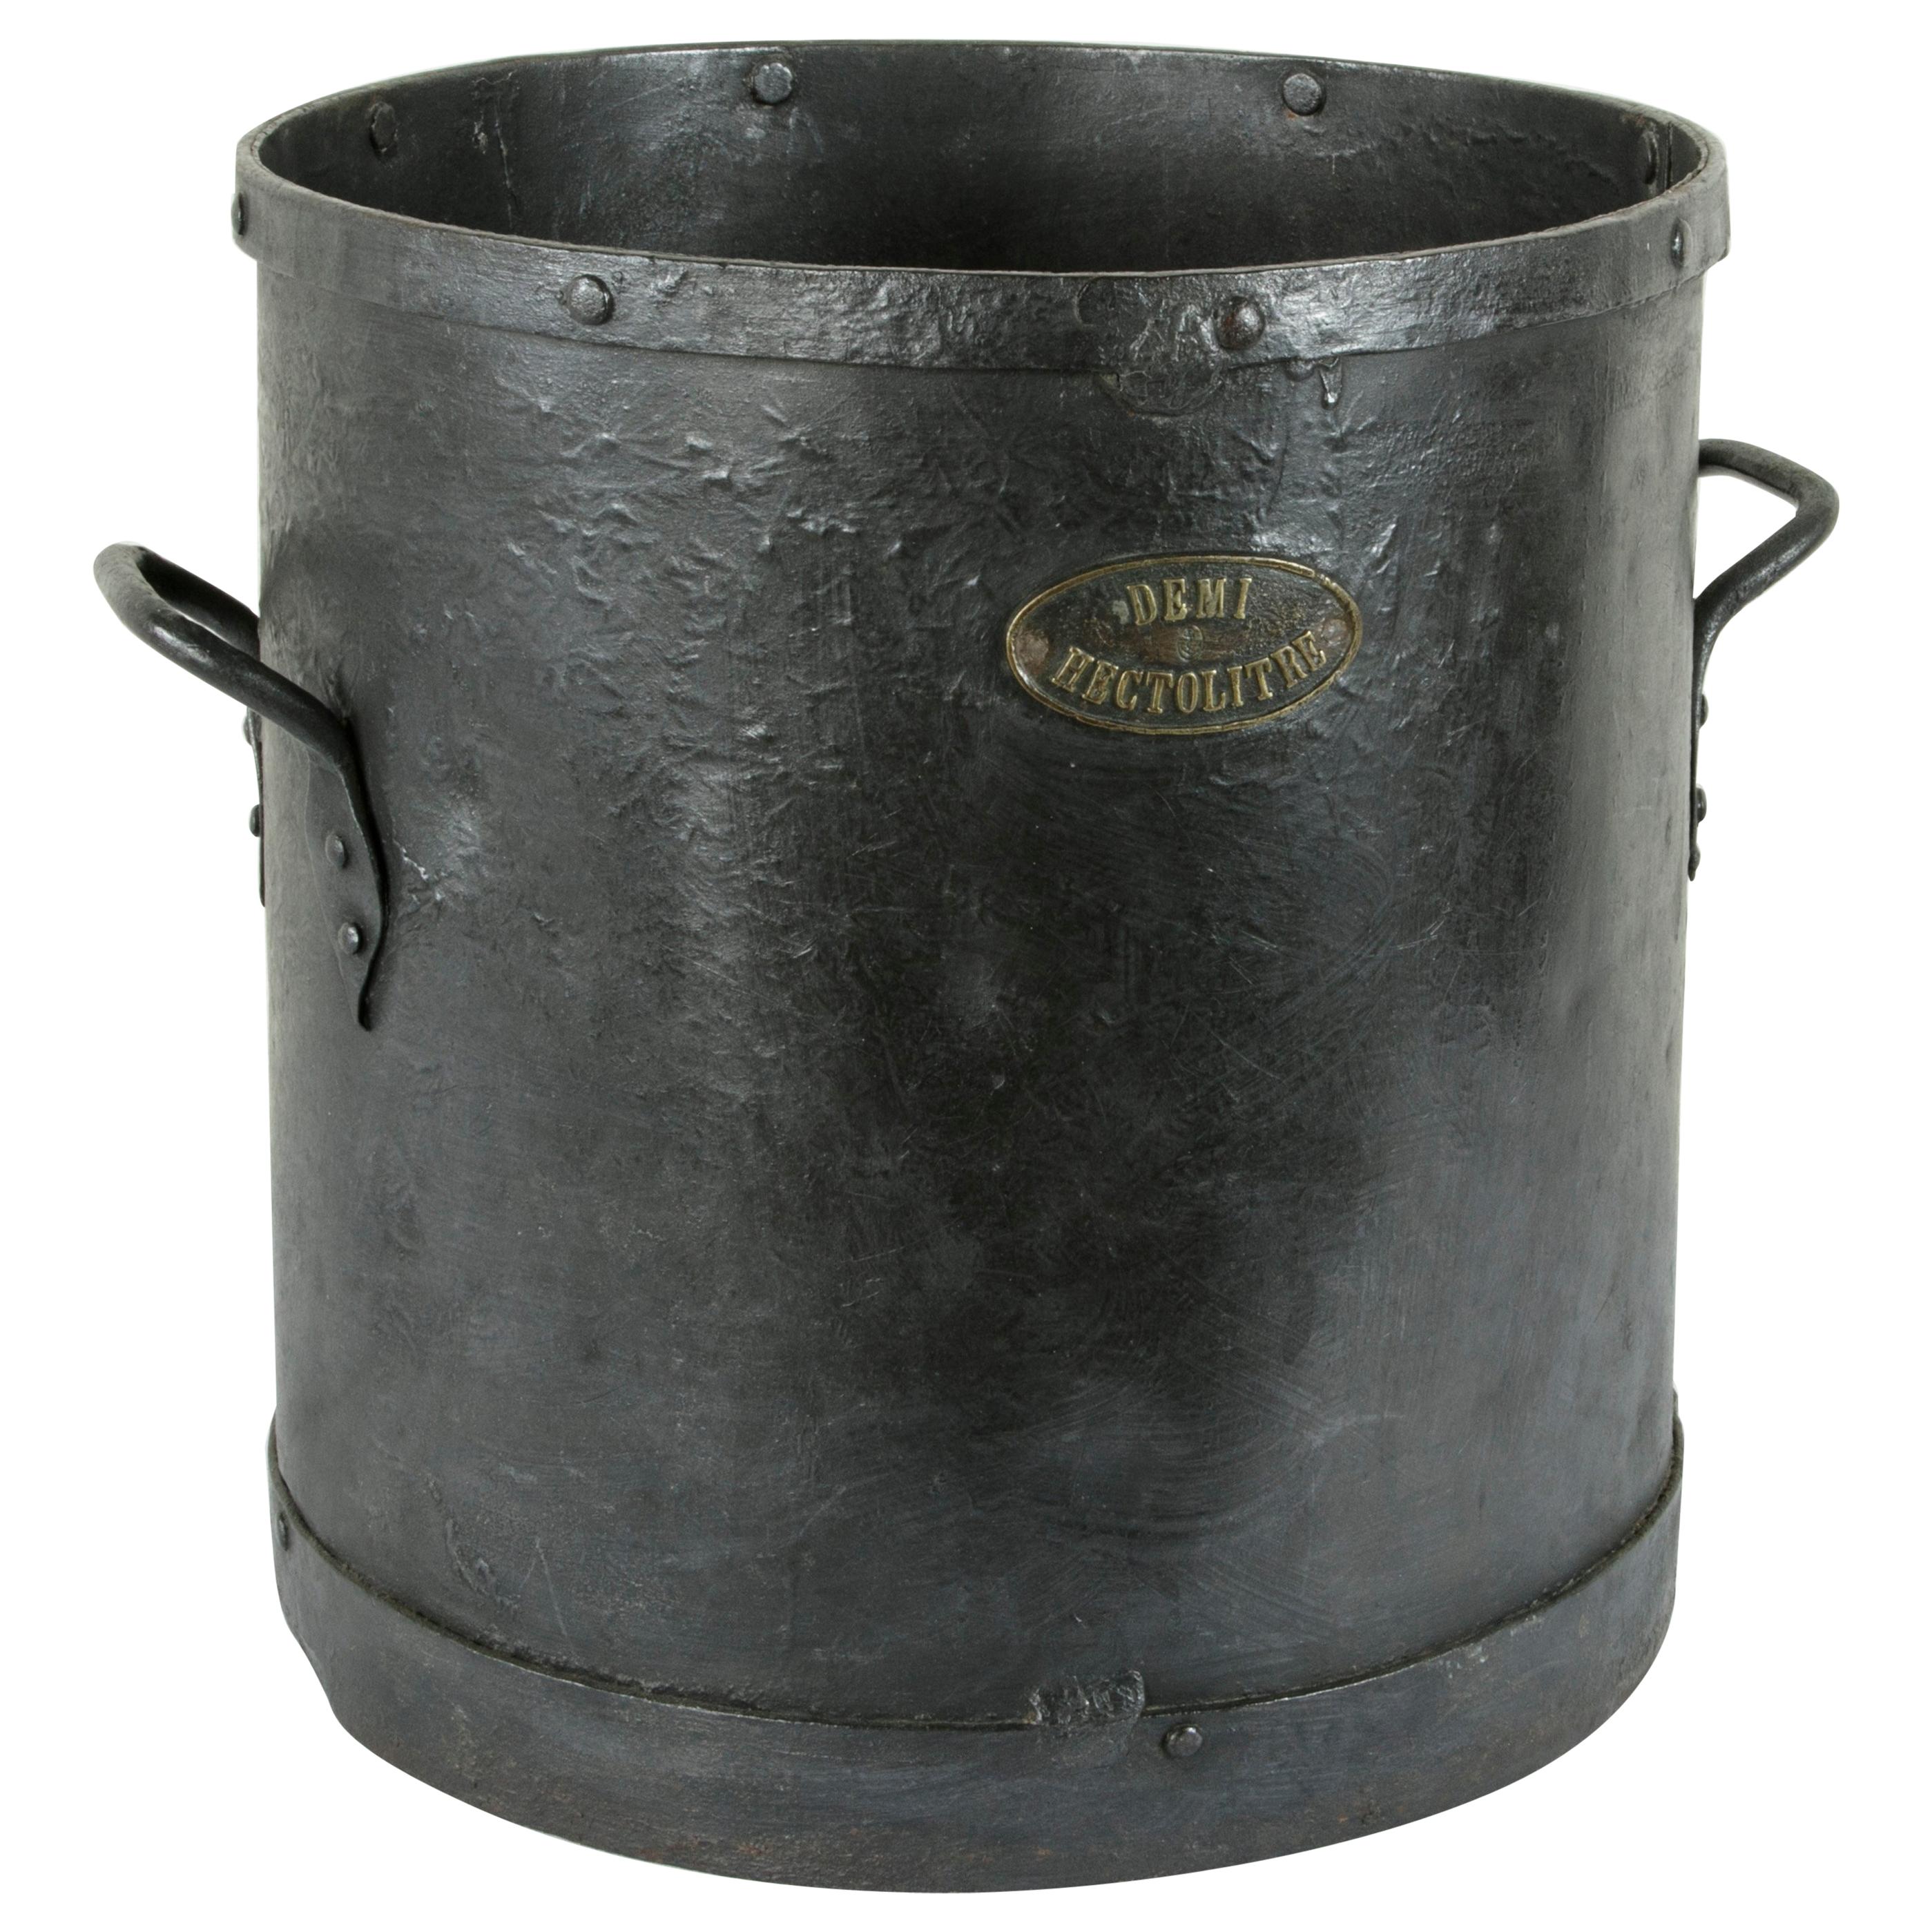 French Iron Grain Measure, Planter, or Cachepot with Handles, circa 1900